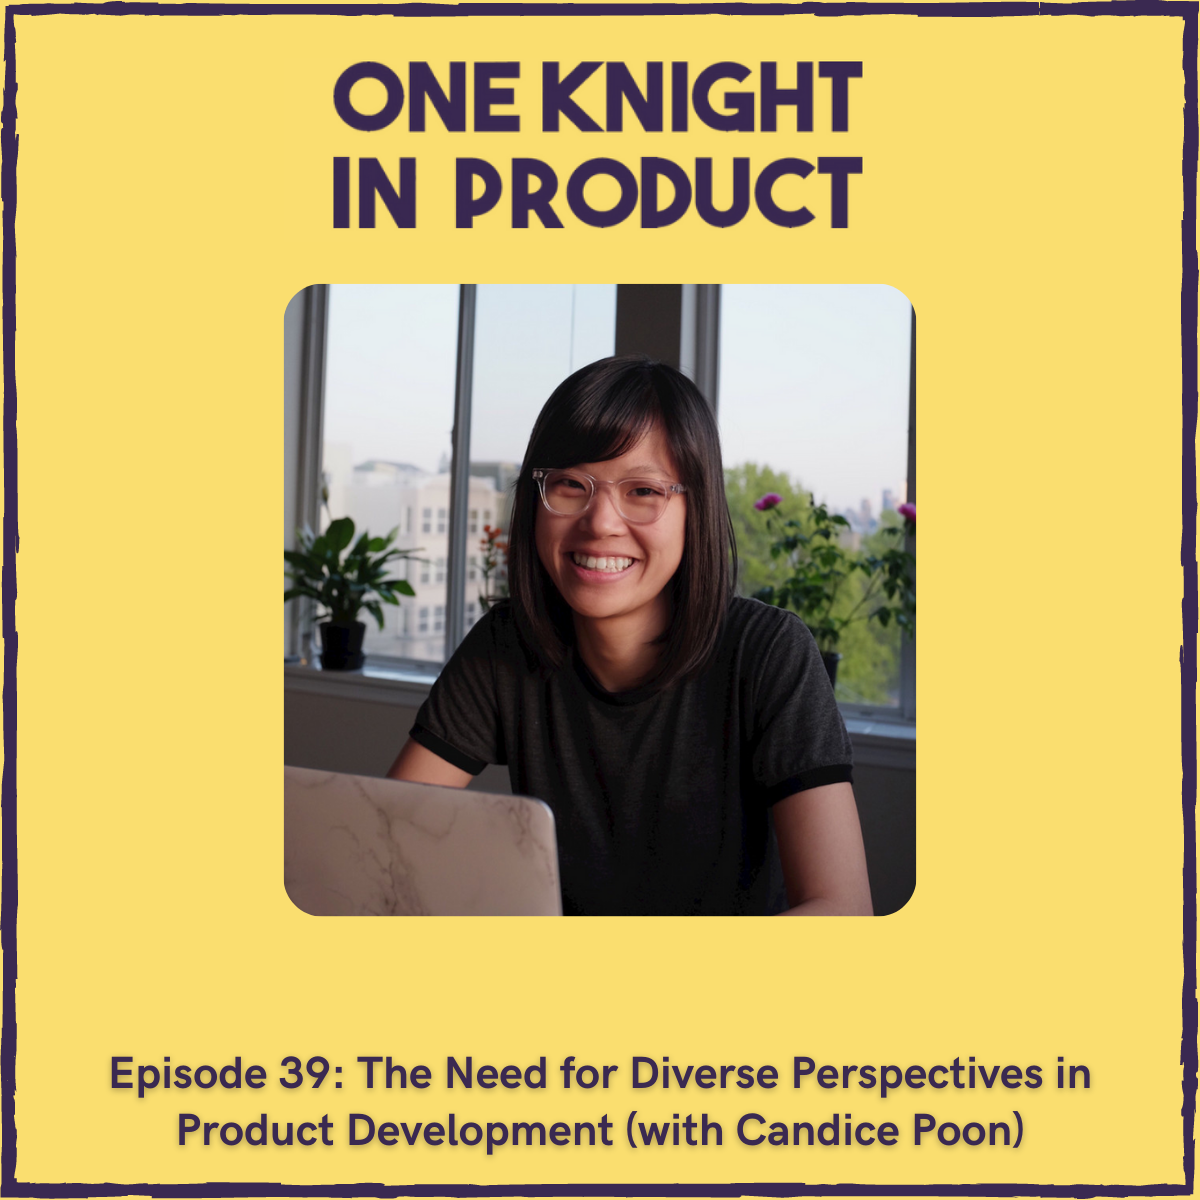 The Need for Diverse Perspectives in Product Development (with Candice Poon, Program Manager @ Microsoft)